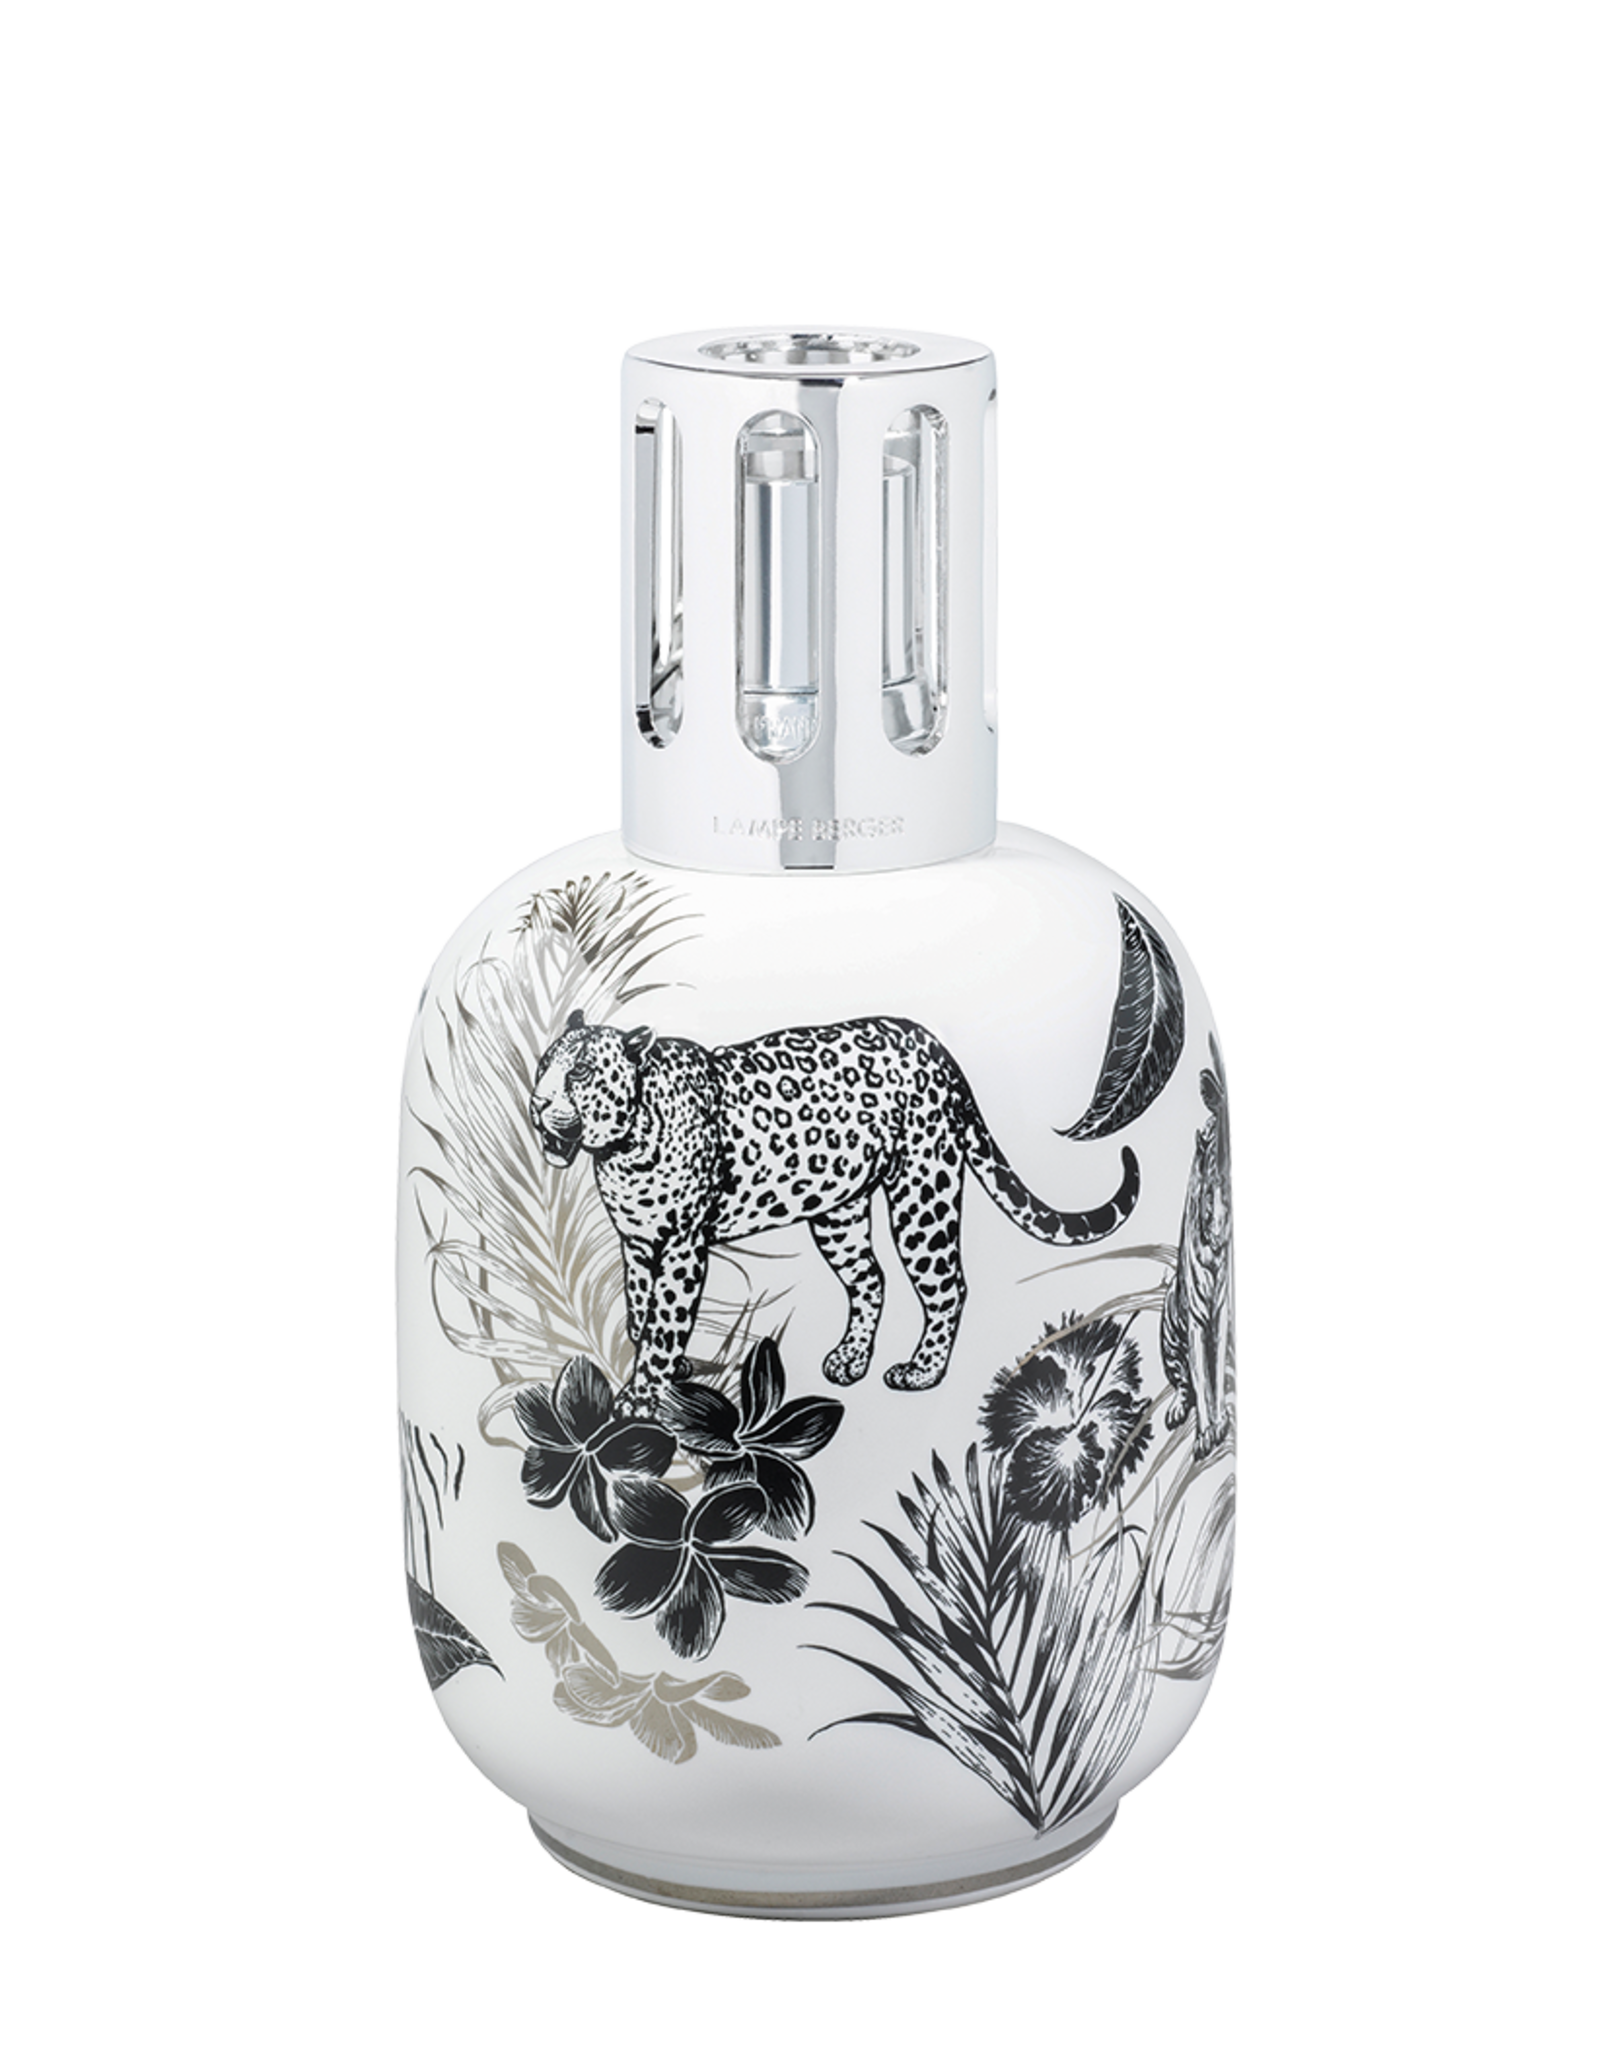 Lampe Berger Jungle Home Fragrance Lamp in White